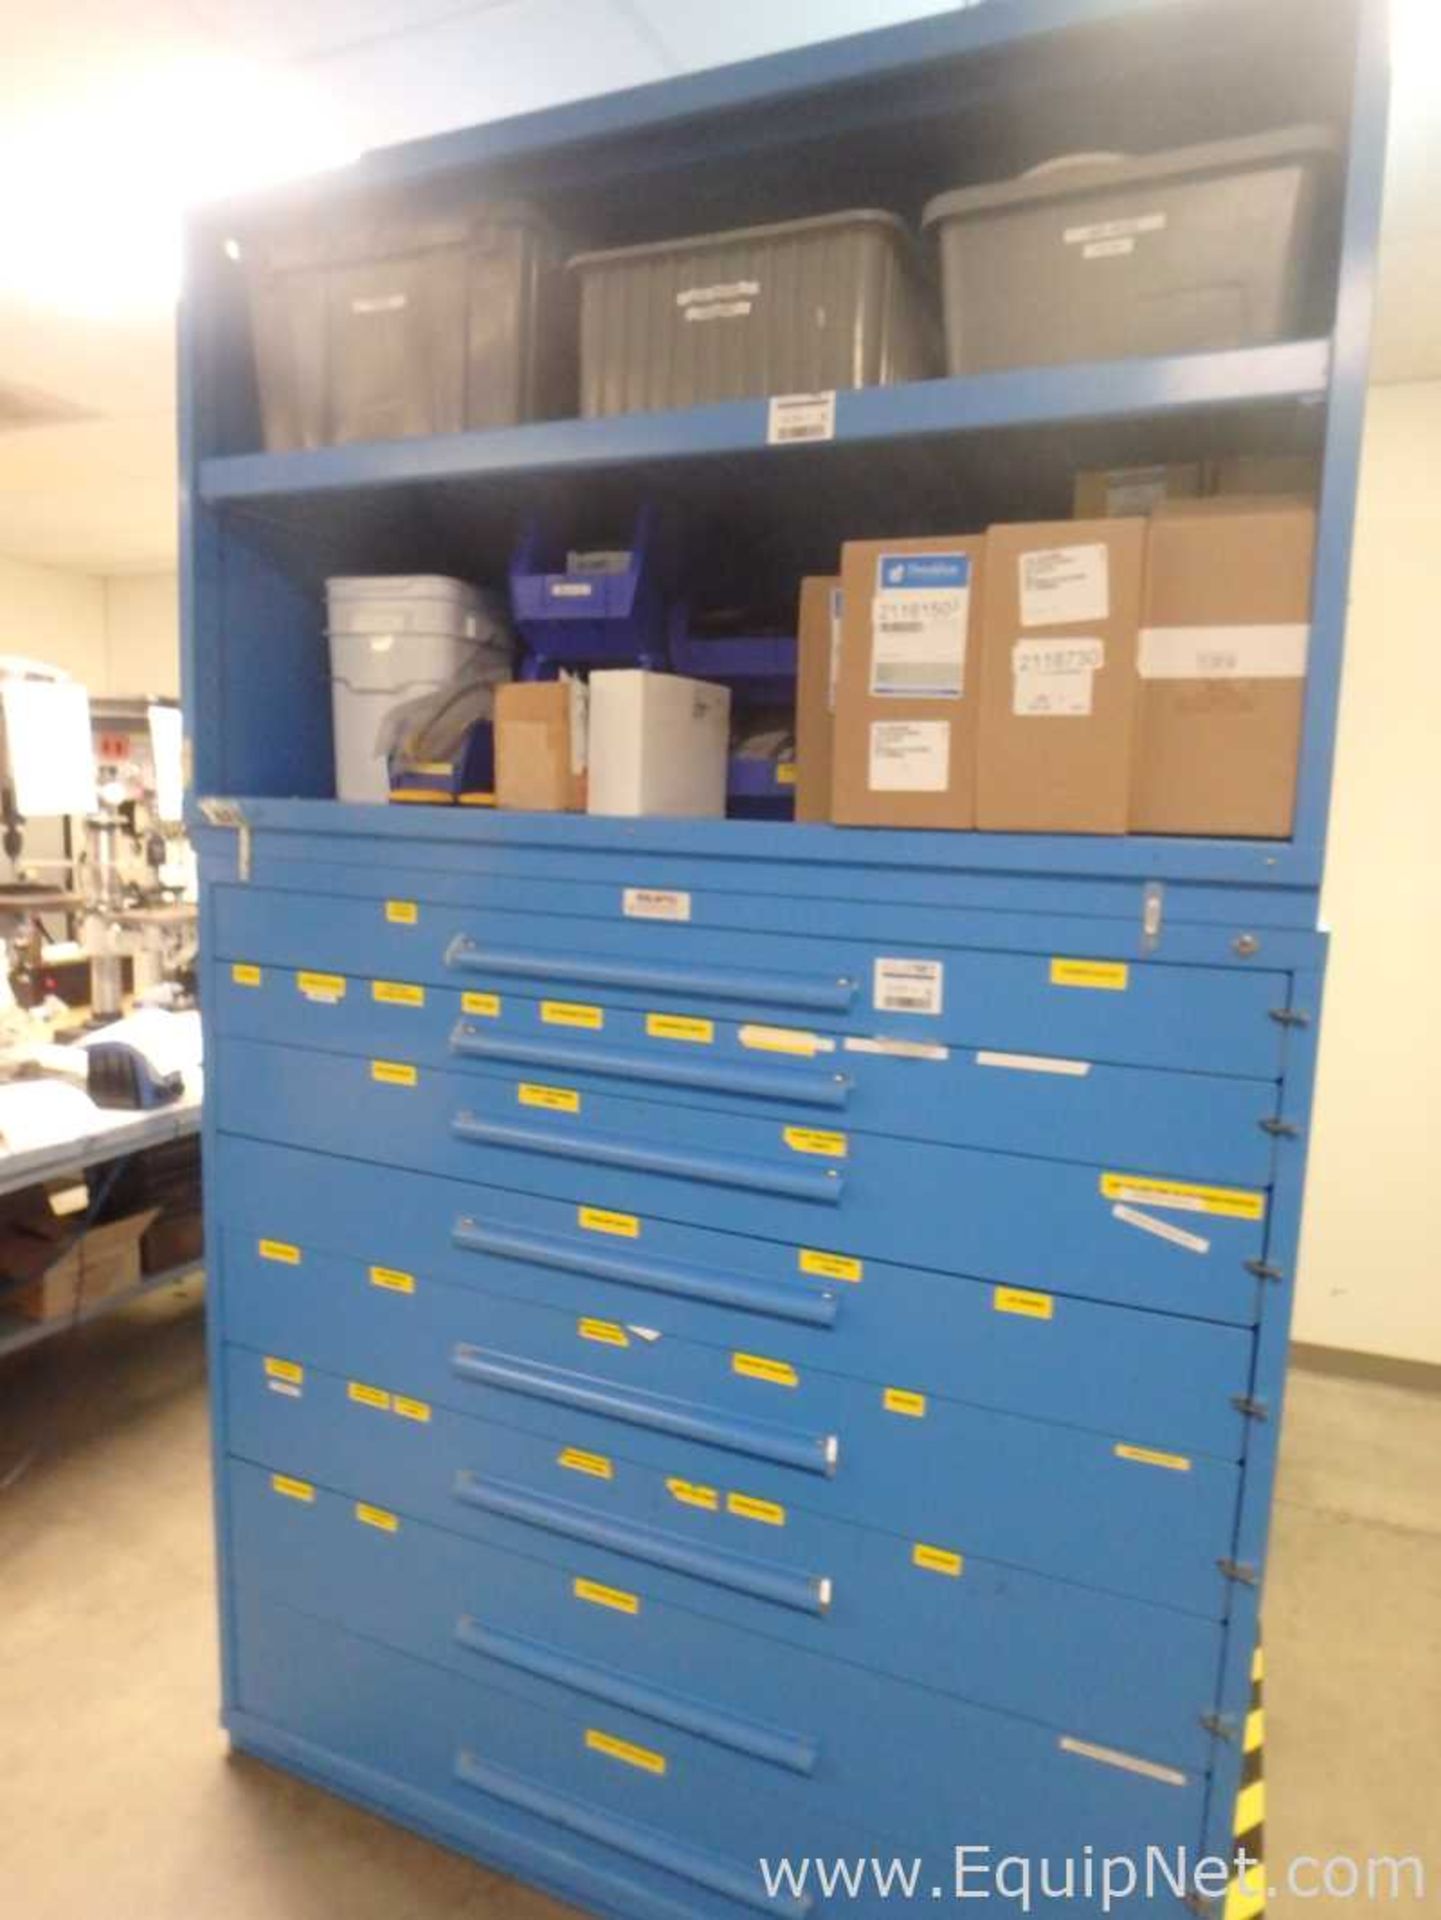 2 Equipto Storage Cabinets - Image 2 of 4